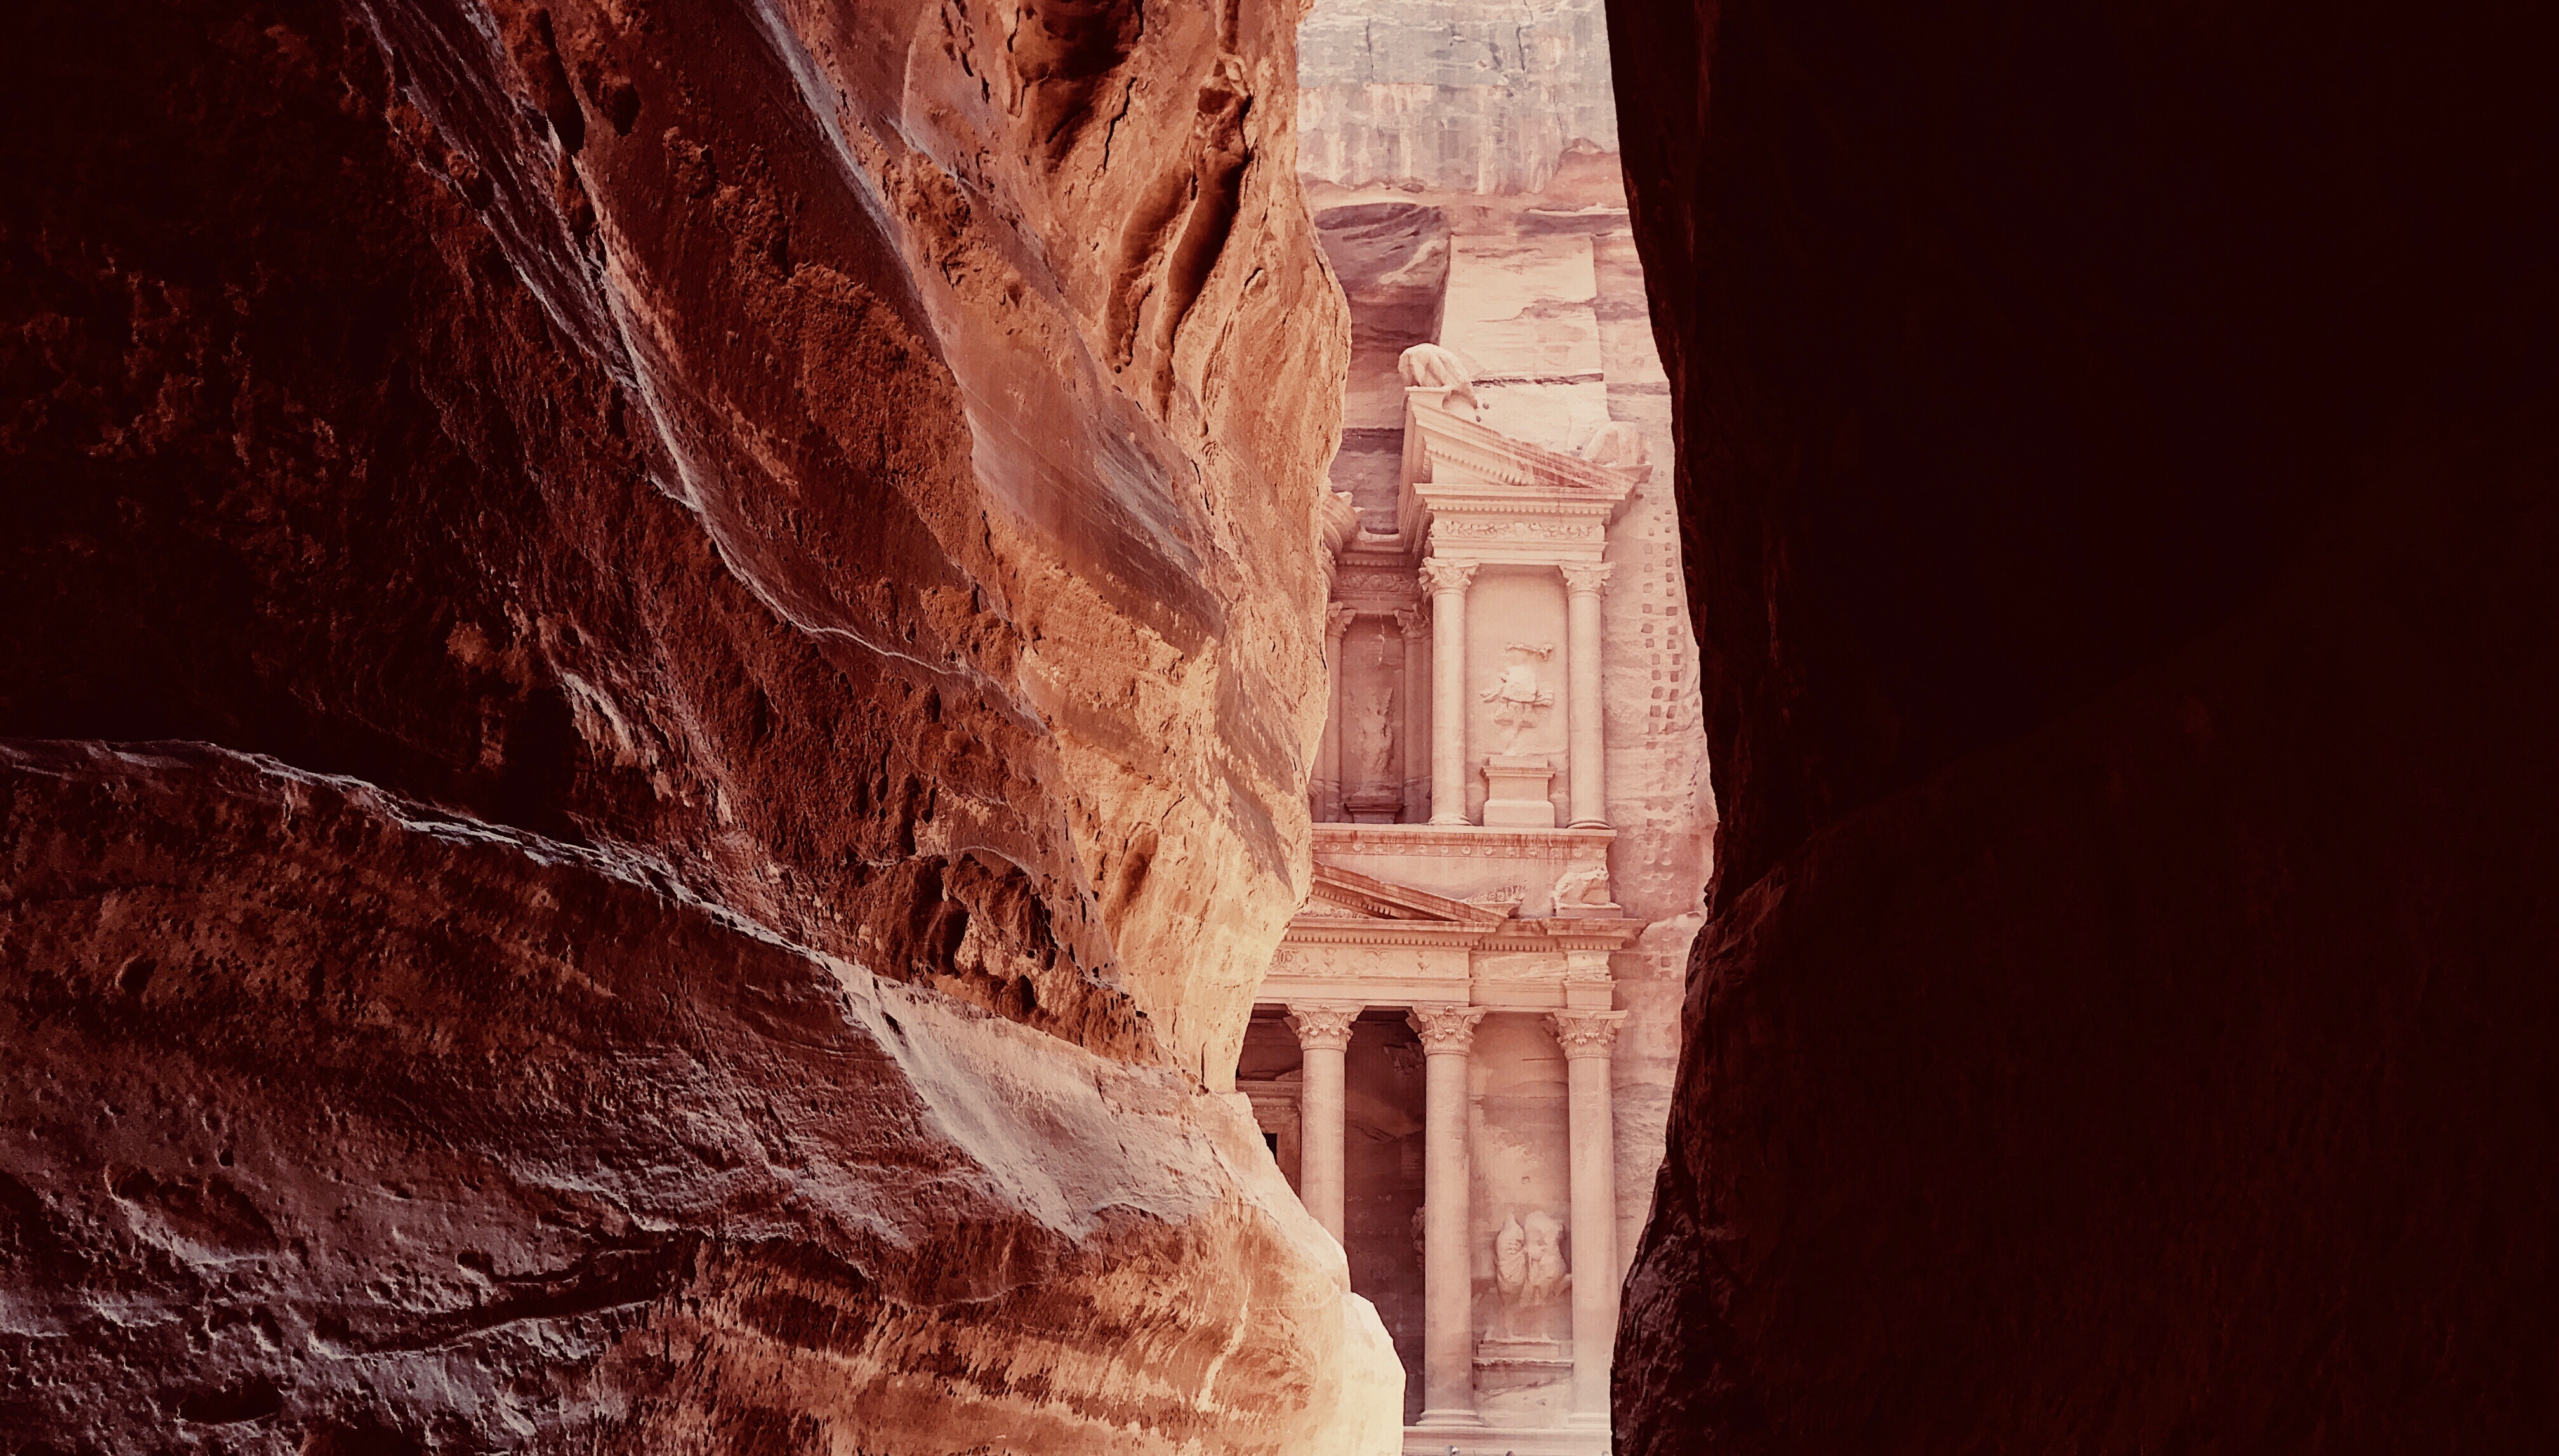 Jordan: A journey of exploration and discovery